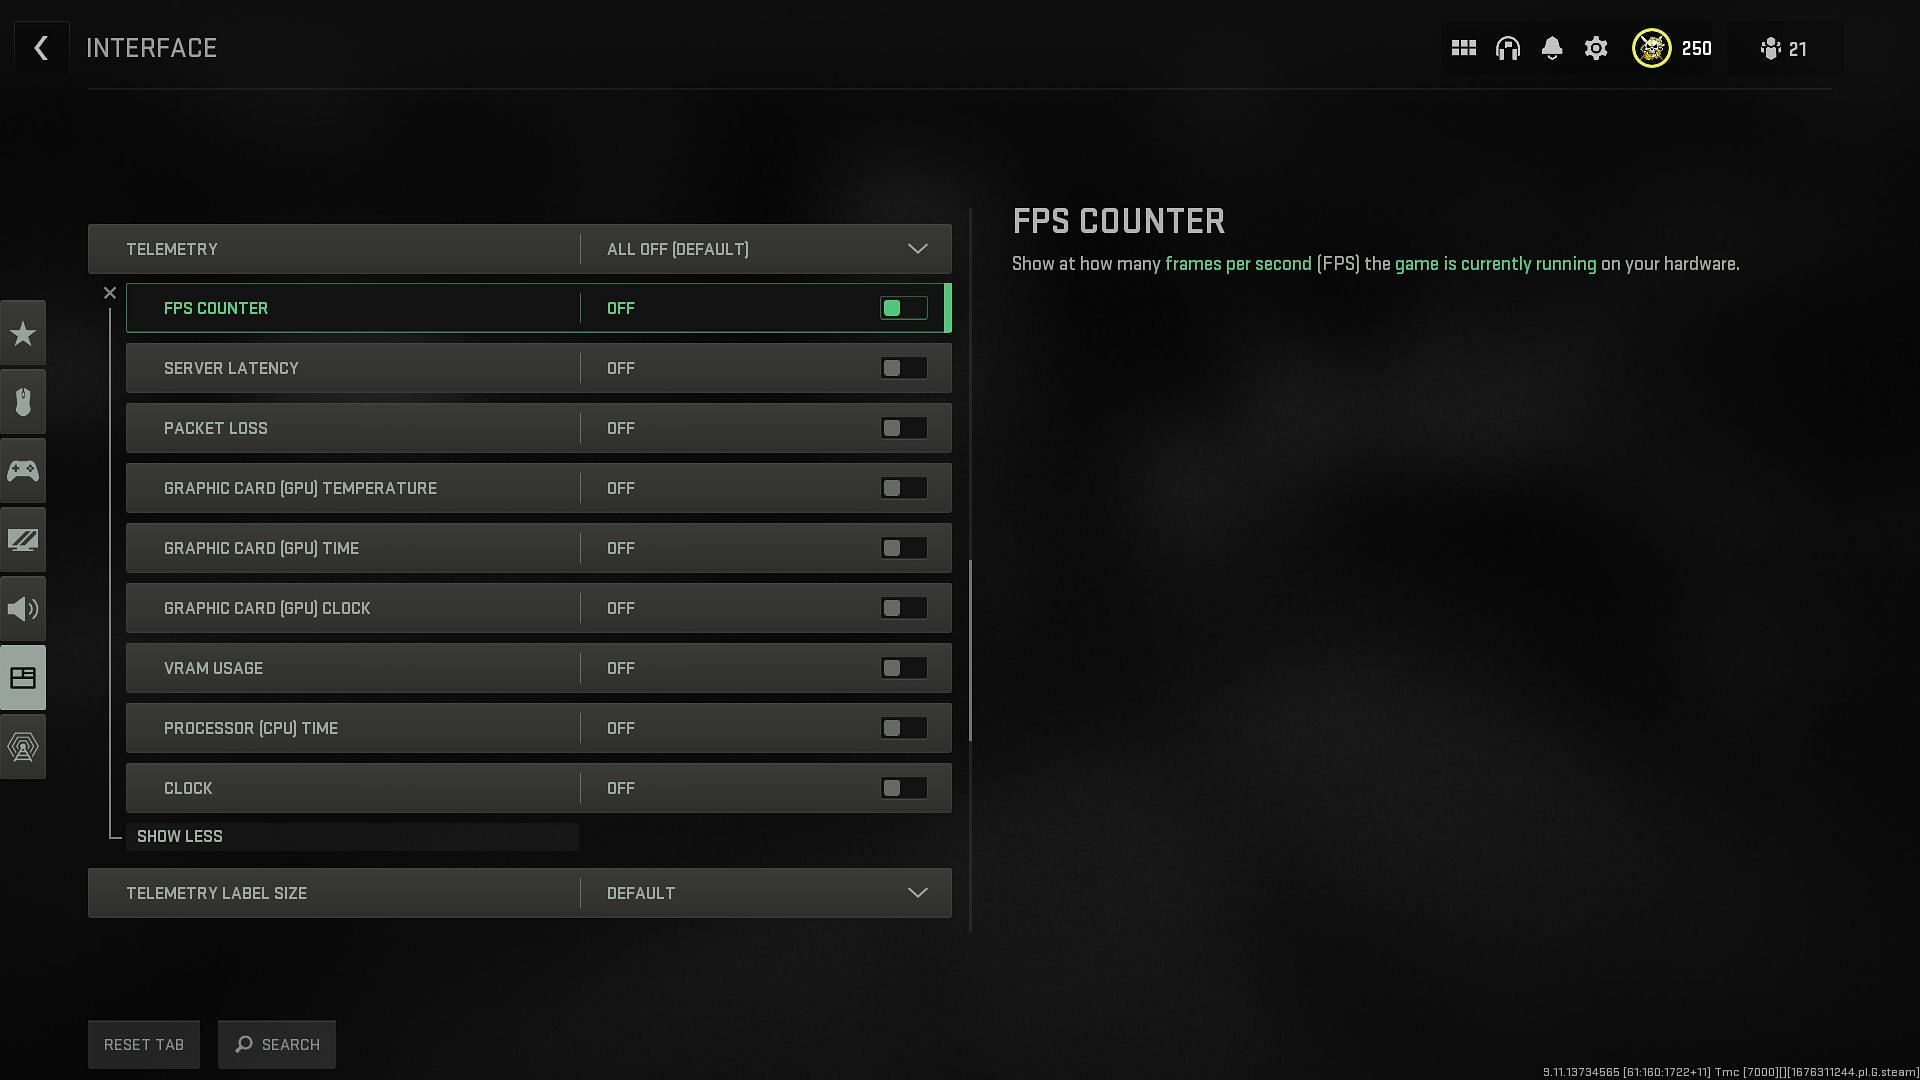 Telemetry options to check FPS and other metrics (Image via Activision)